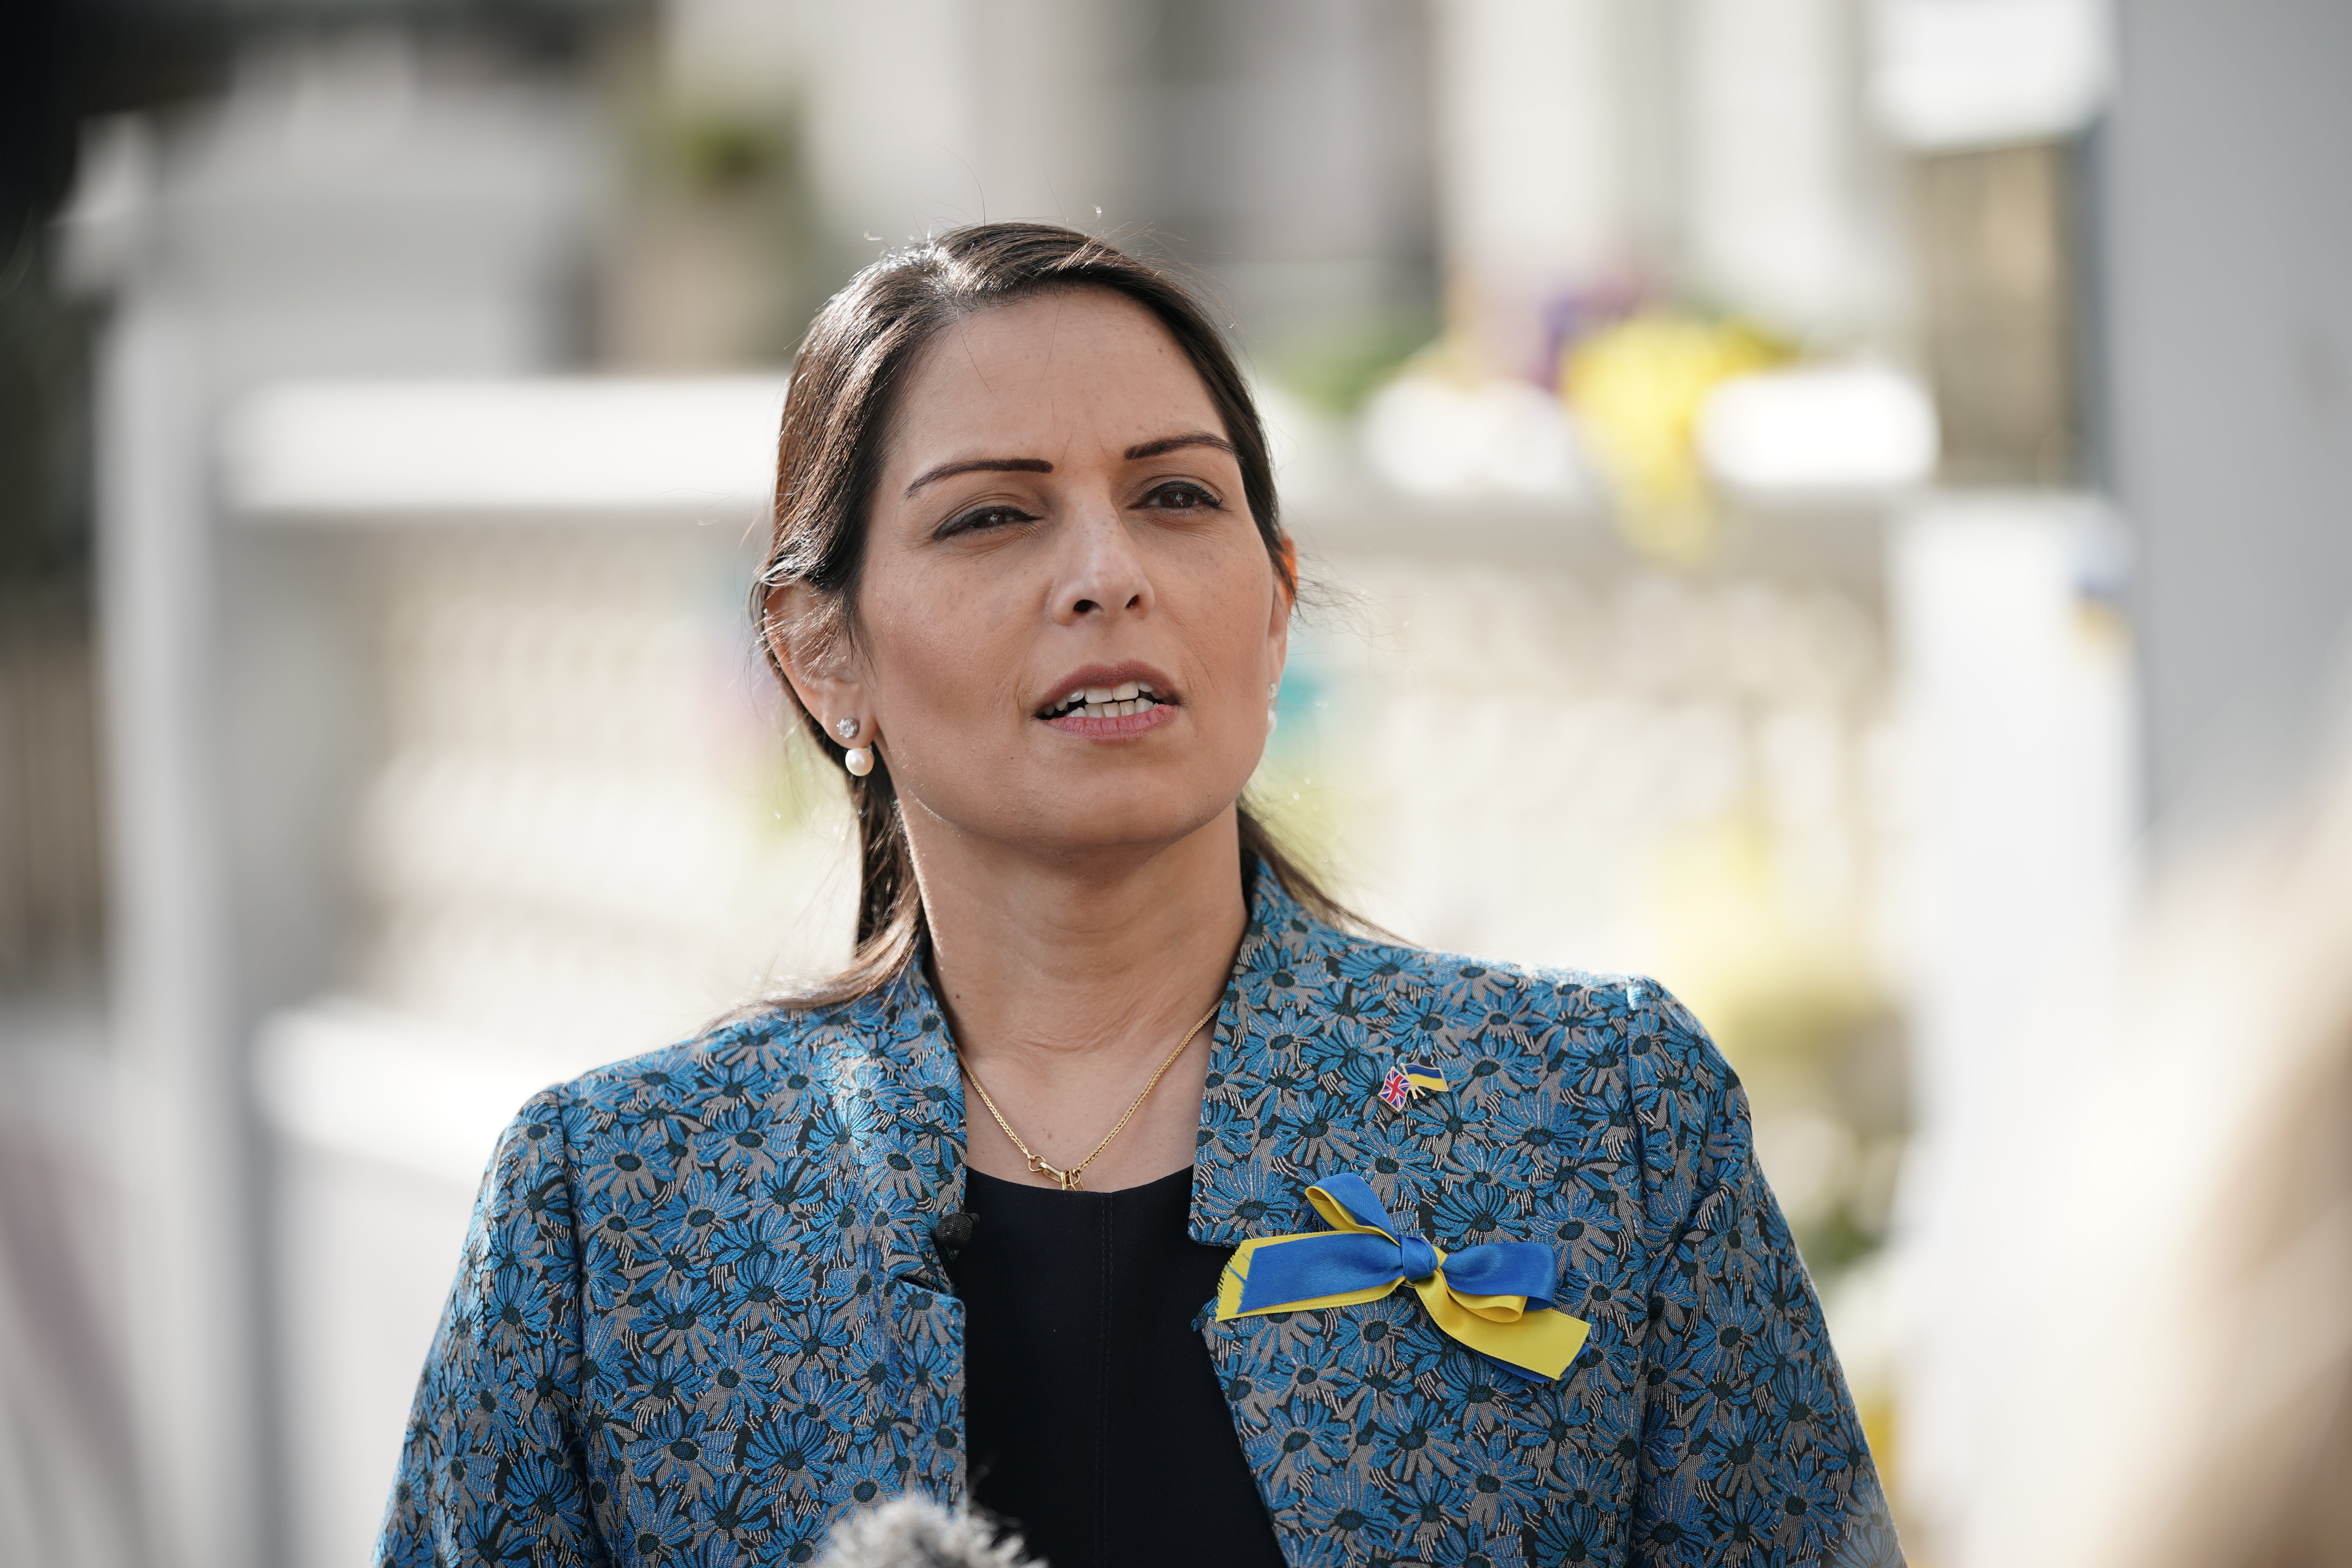 Priti Patel is said to have become ‘fixated’ on individual asylum cases